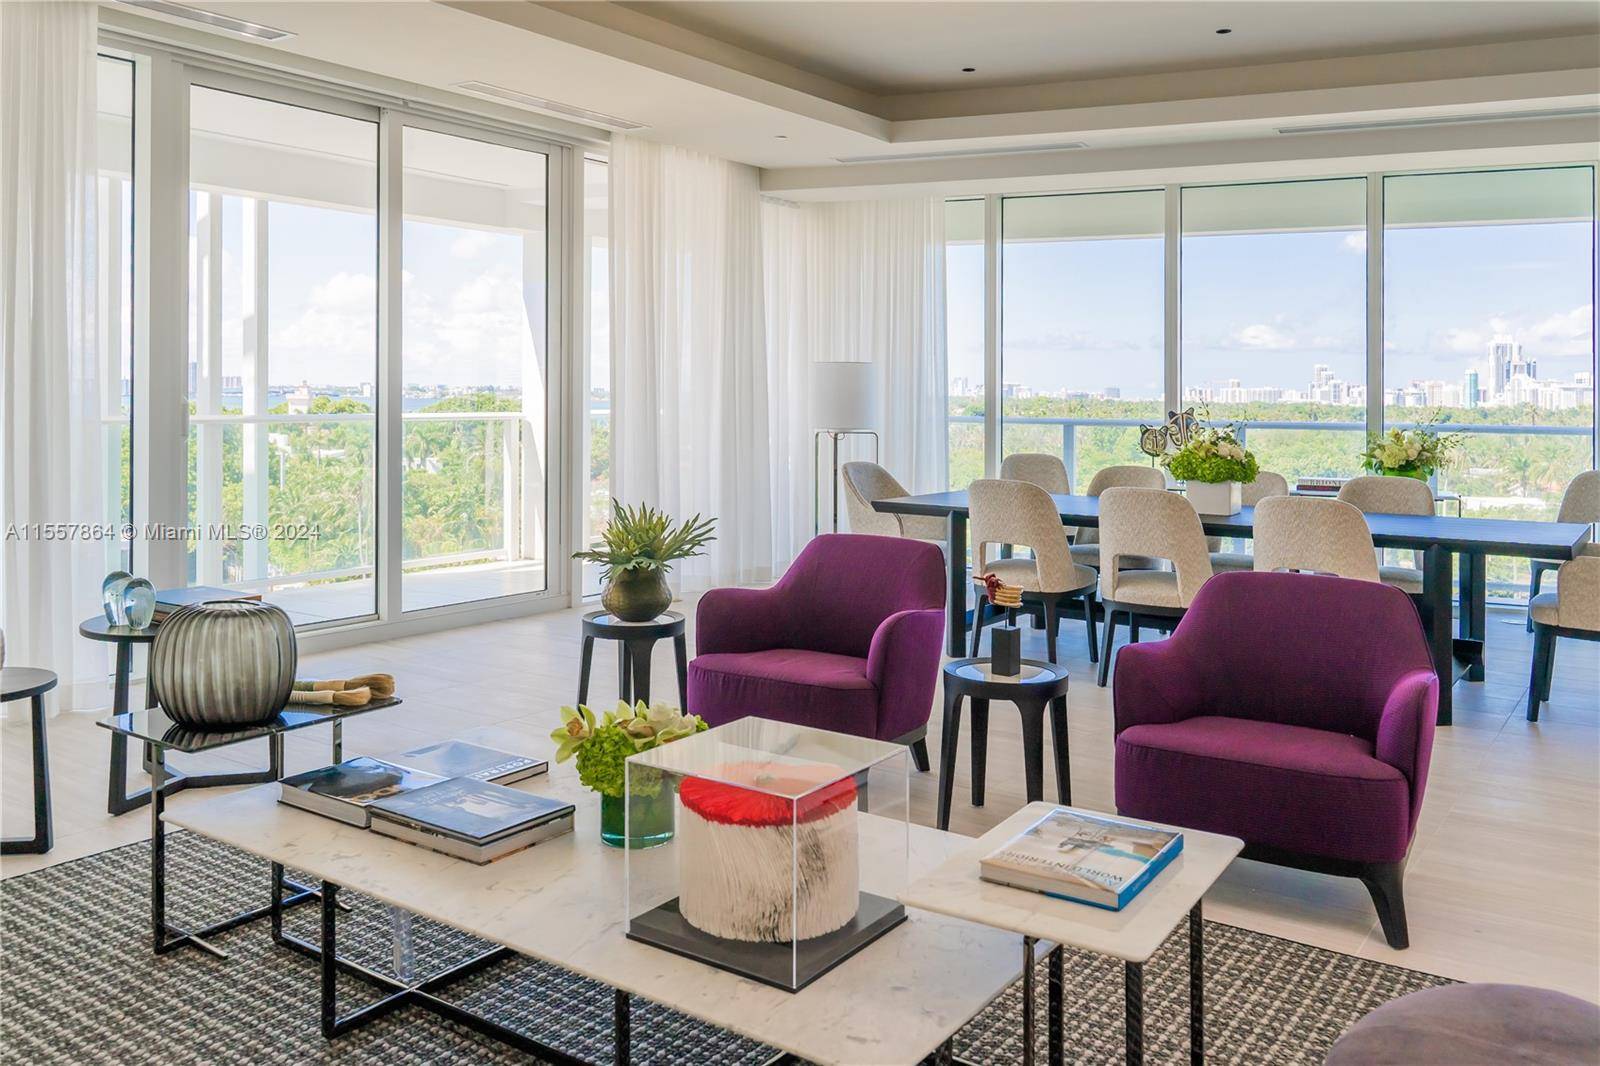 Indulge in unparalleled luxury living at The Ritz Carlton Miami Beach.